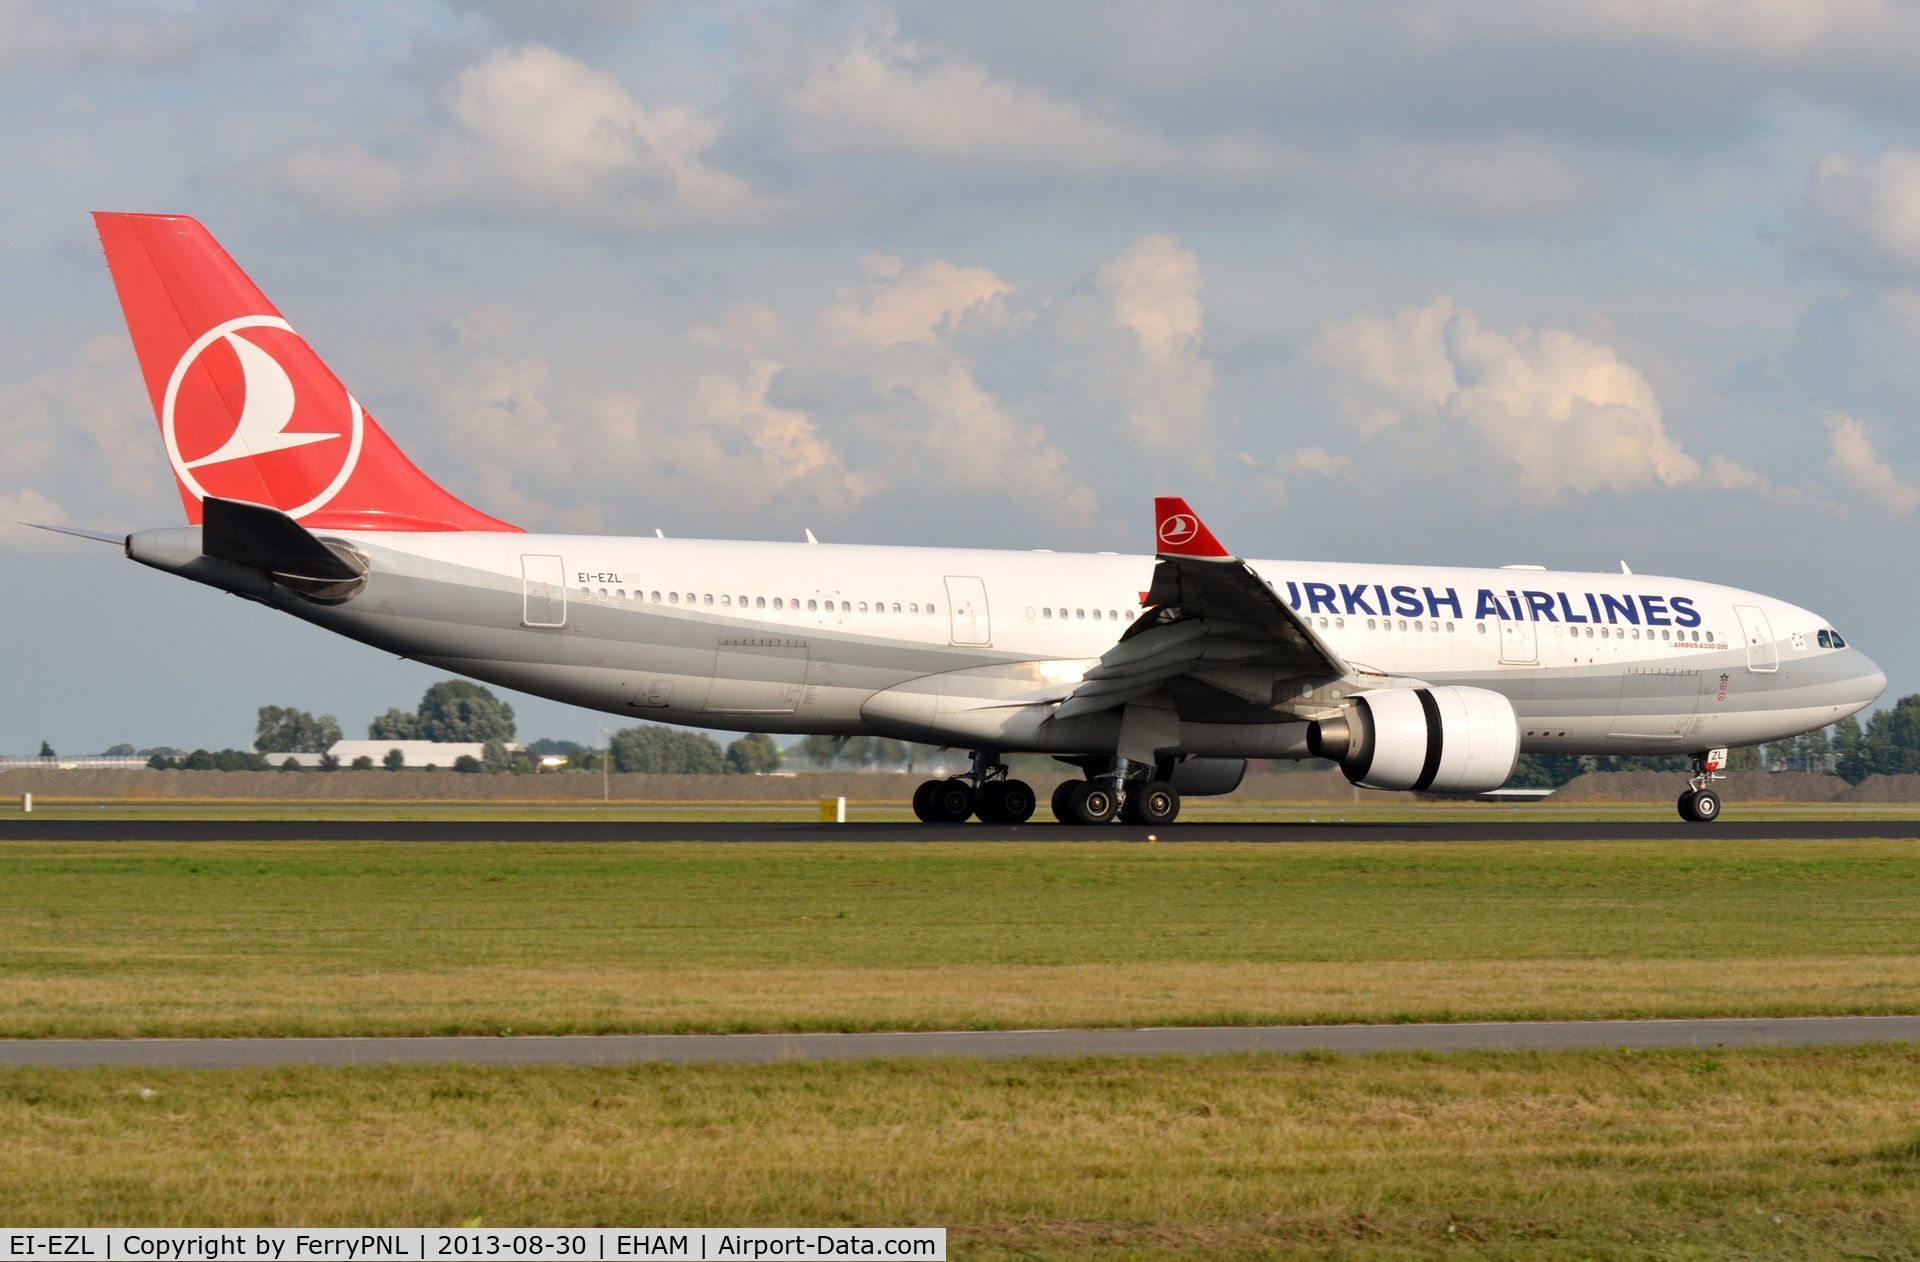 EI-EZL, 2006 Airbus A330-223 C/N 802, Turkish A332 in livery of former user Eurofly.